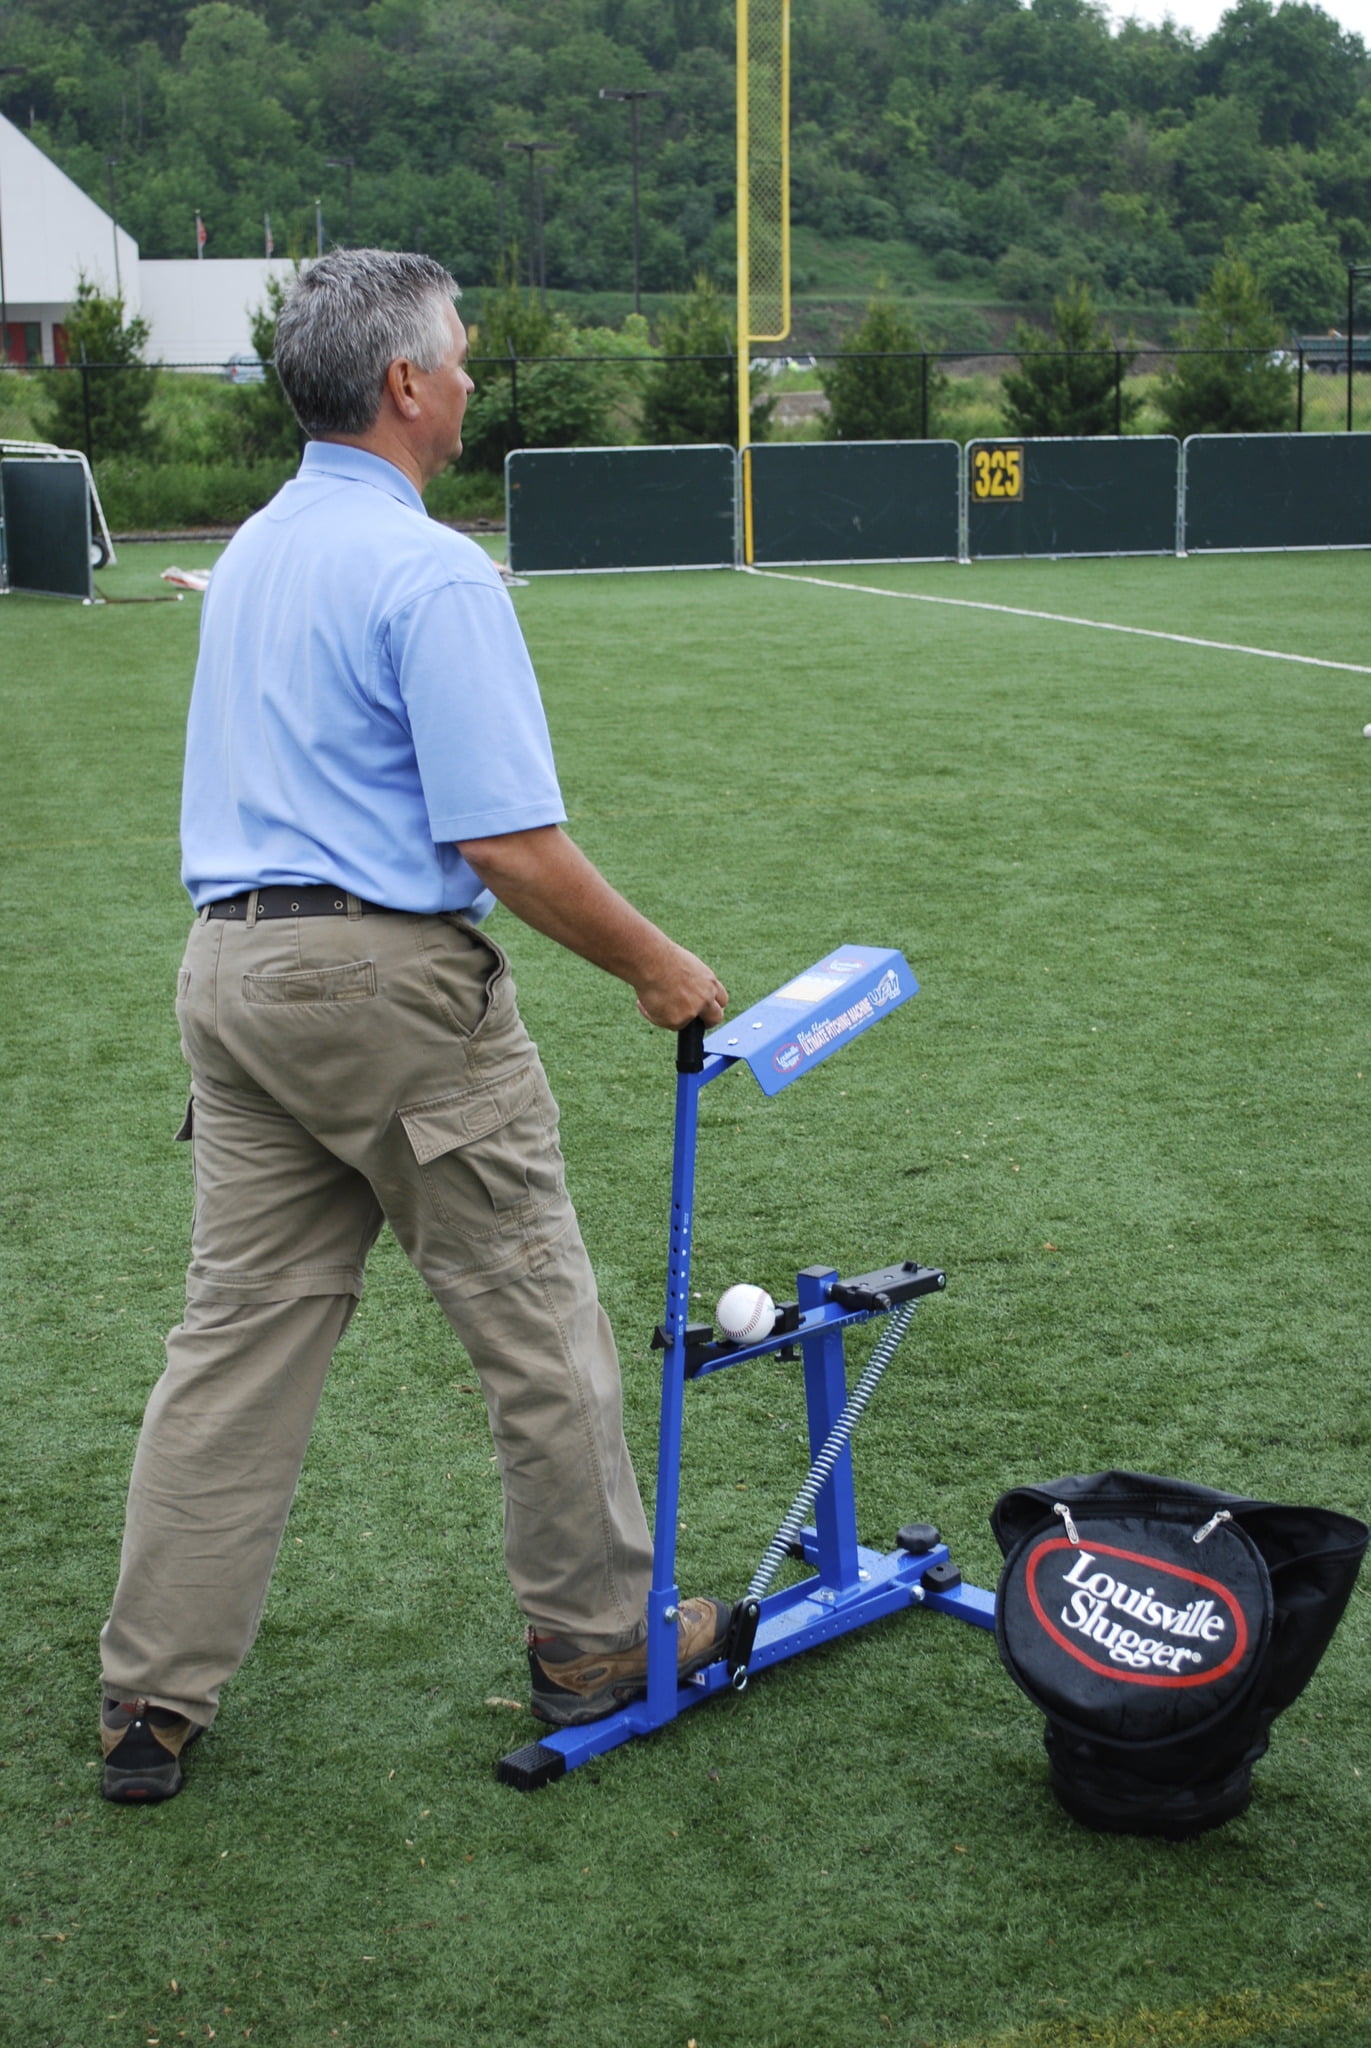 louisville blue flame pitching machine